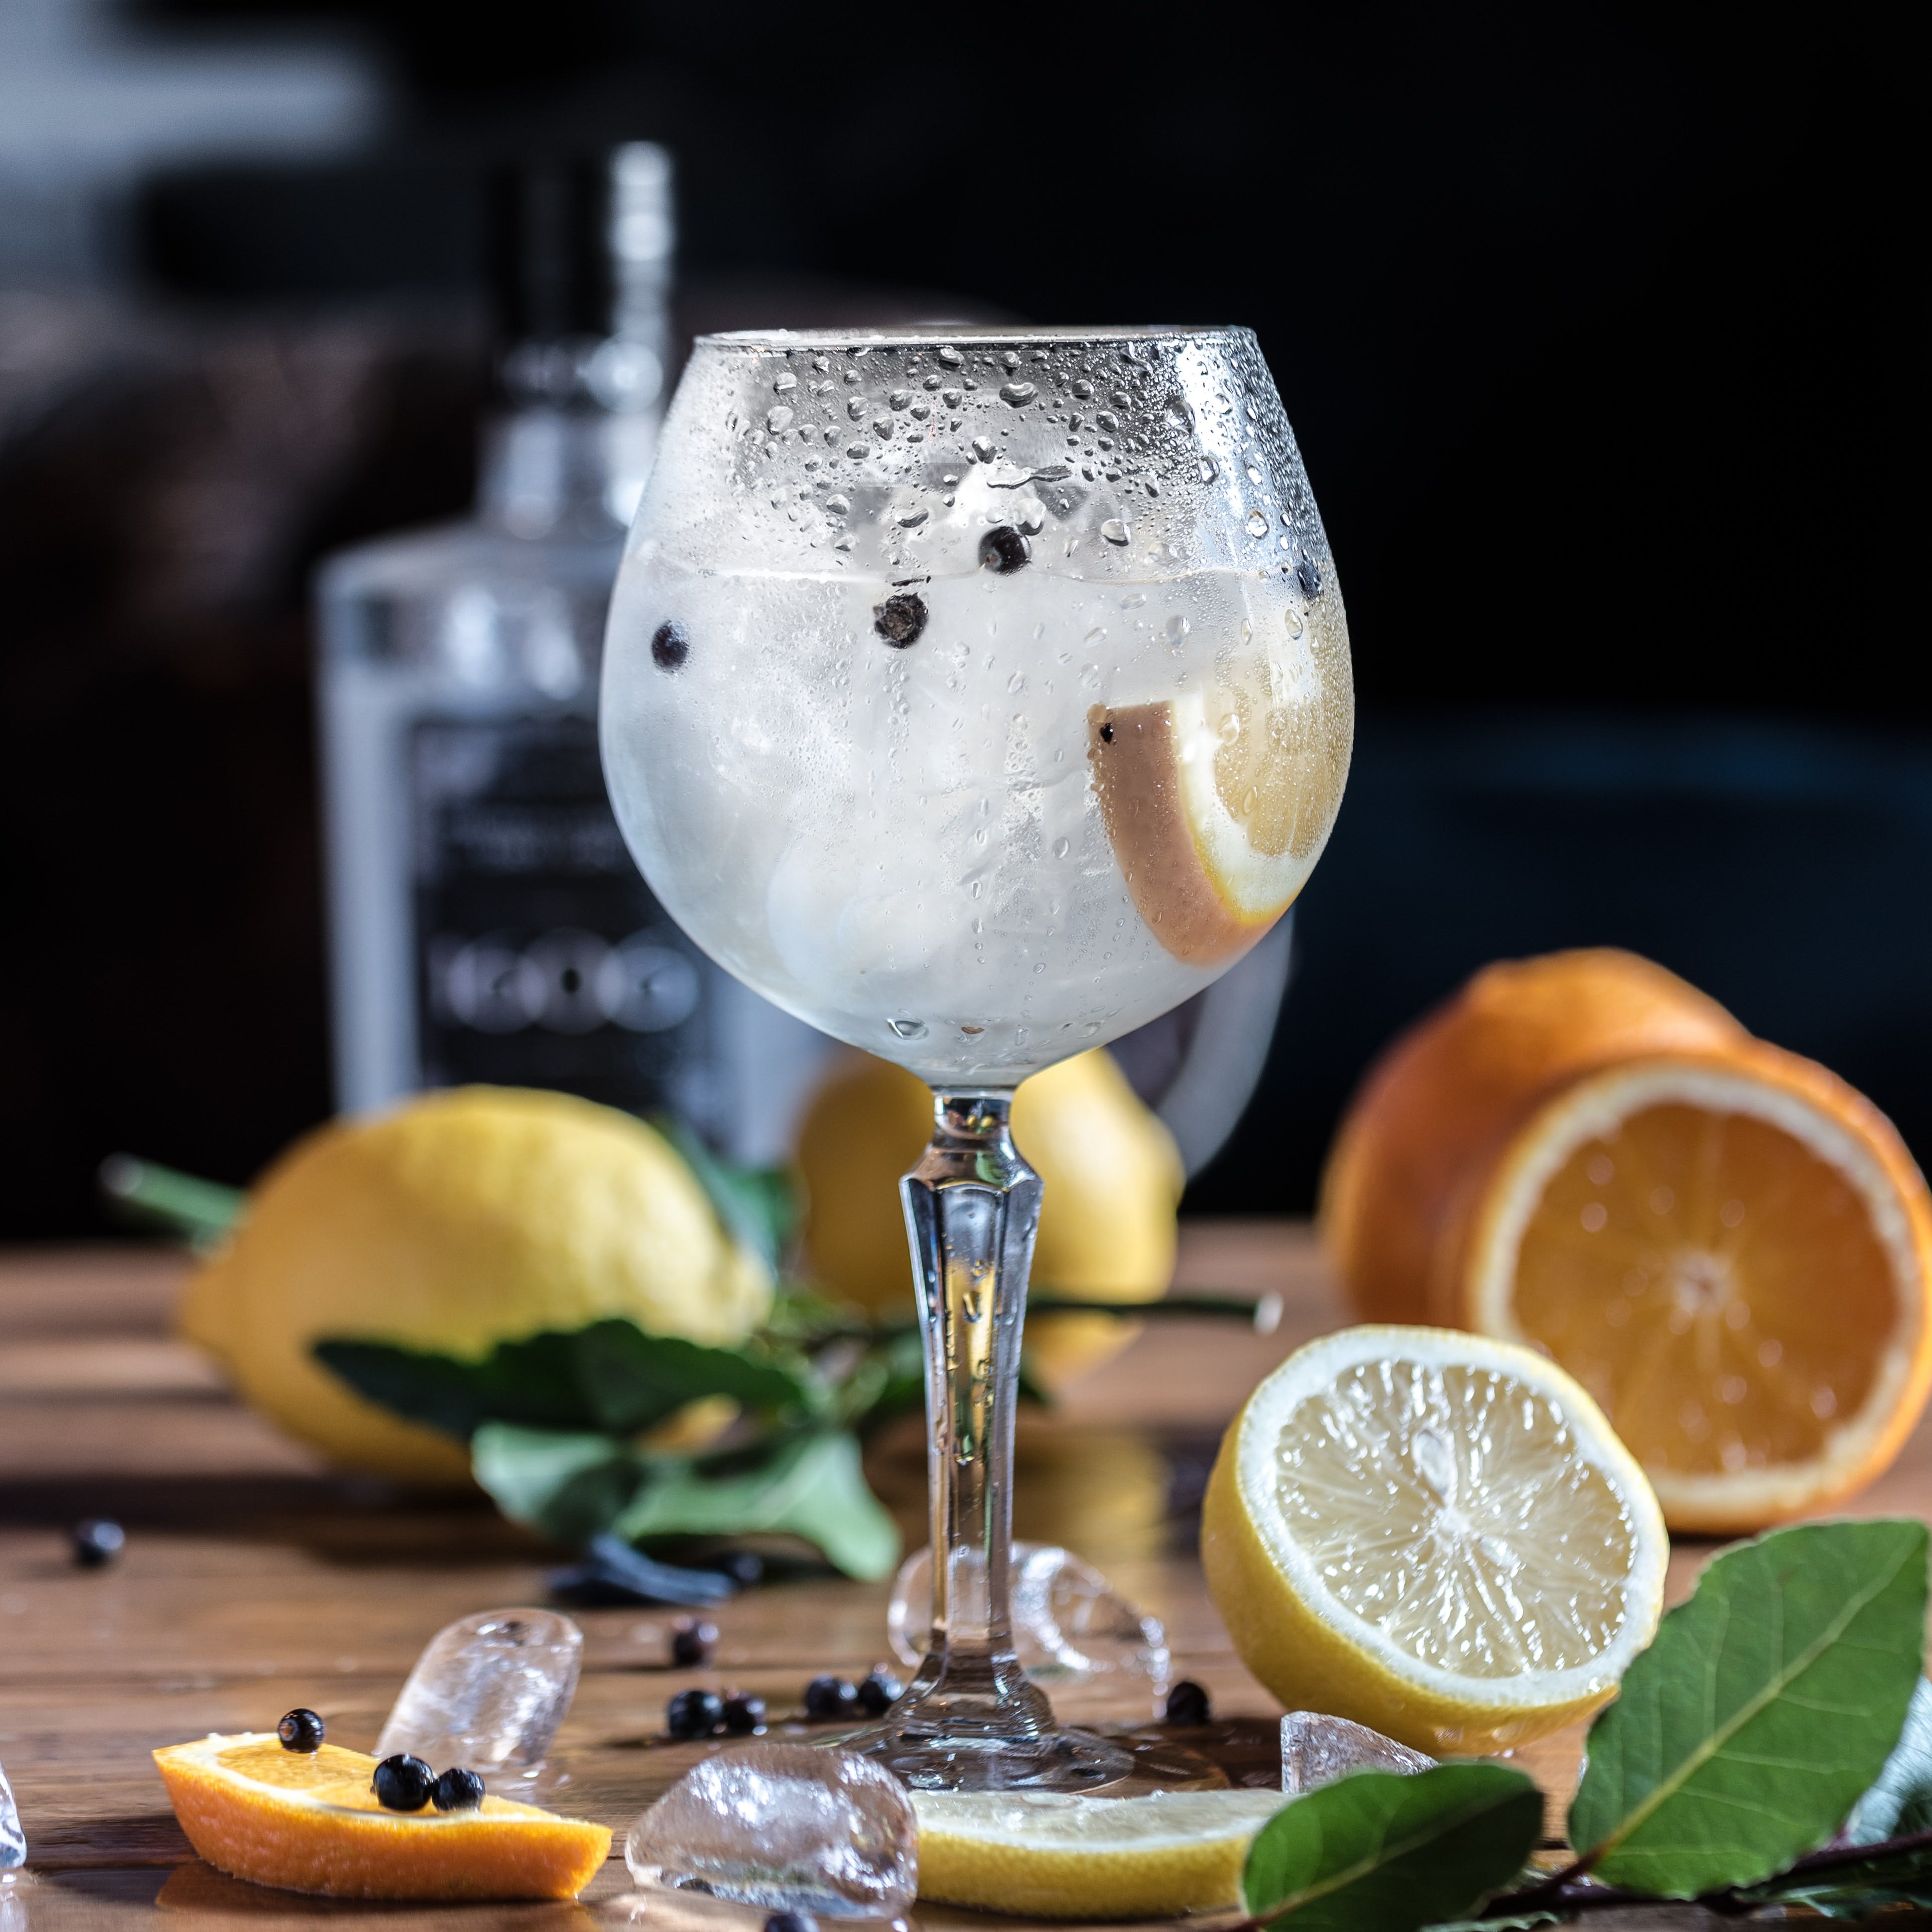 Drink,Champagne cocktail,Gin and tonic,Alcoholic beverage,Food,Distilled beverage,Spritzer,Sour,Daiquiri,Fizz